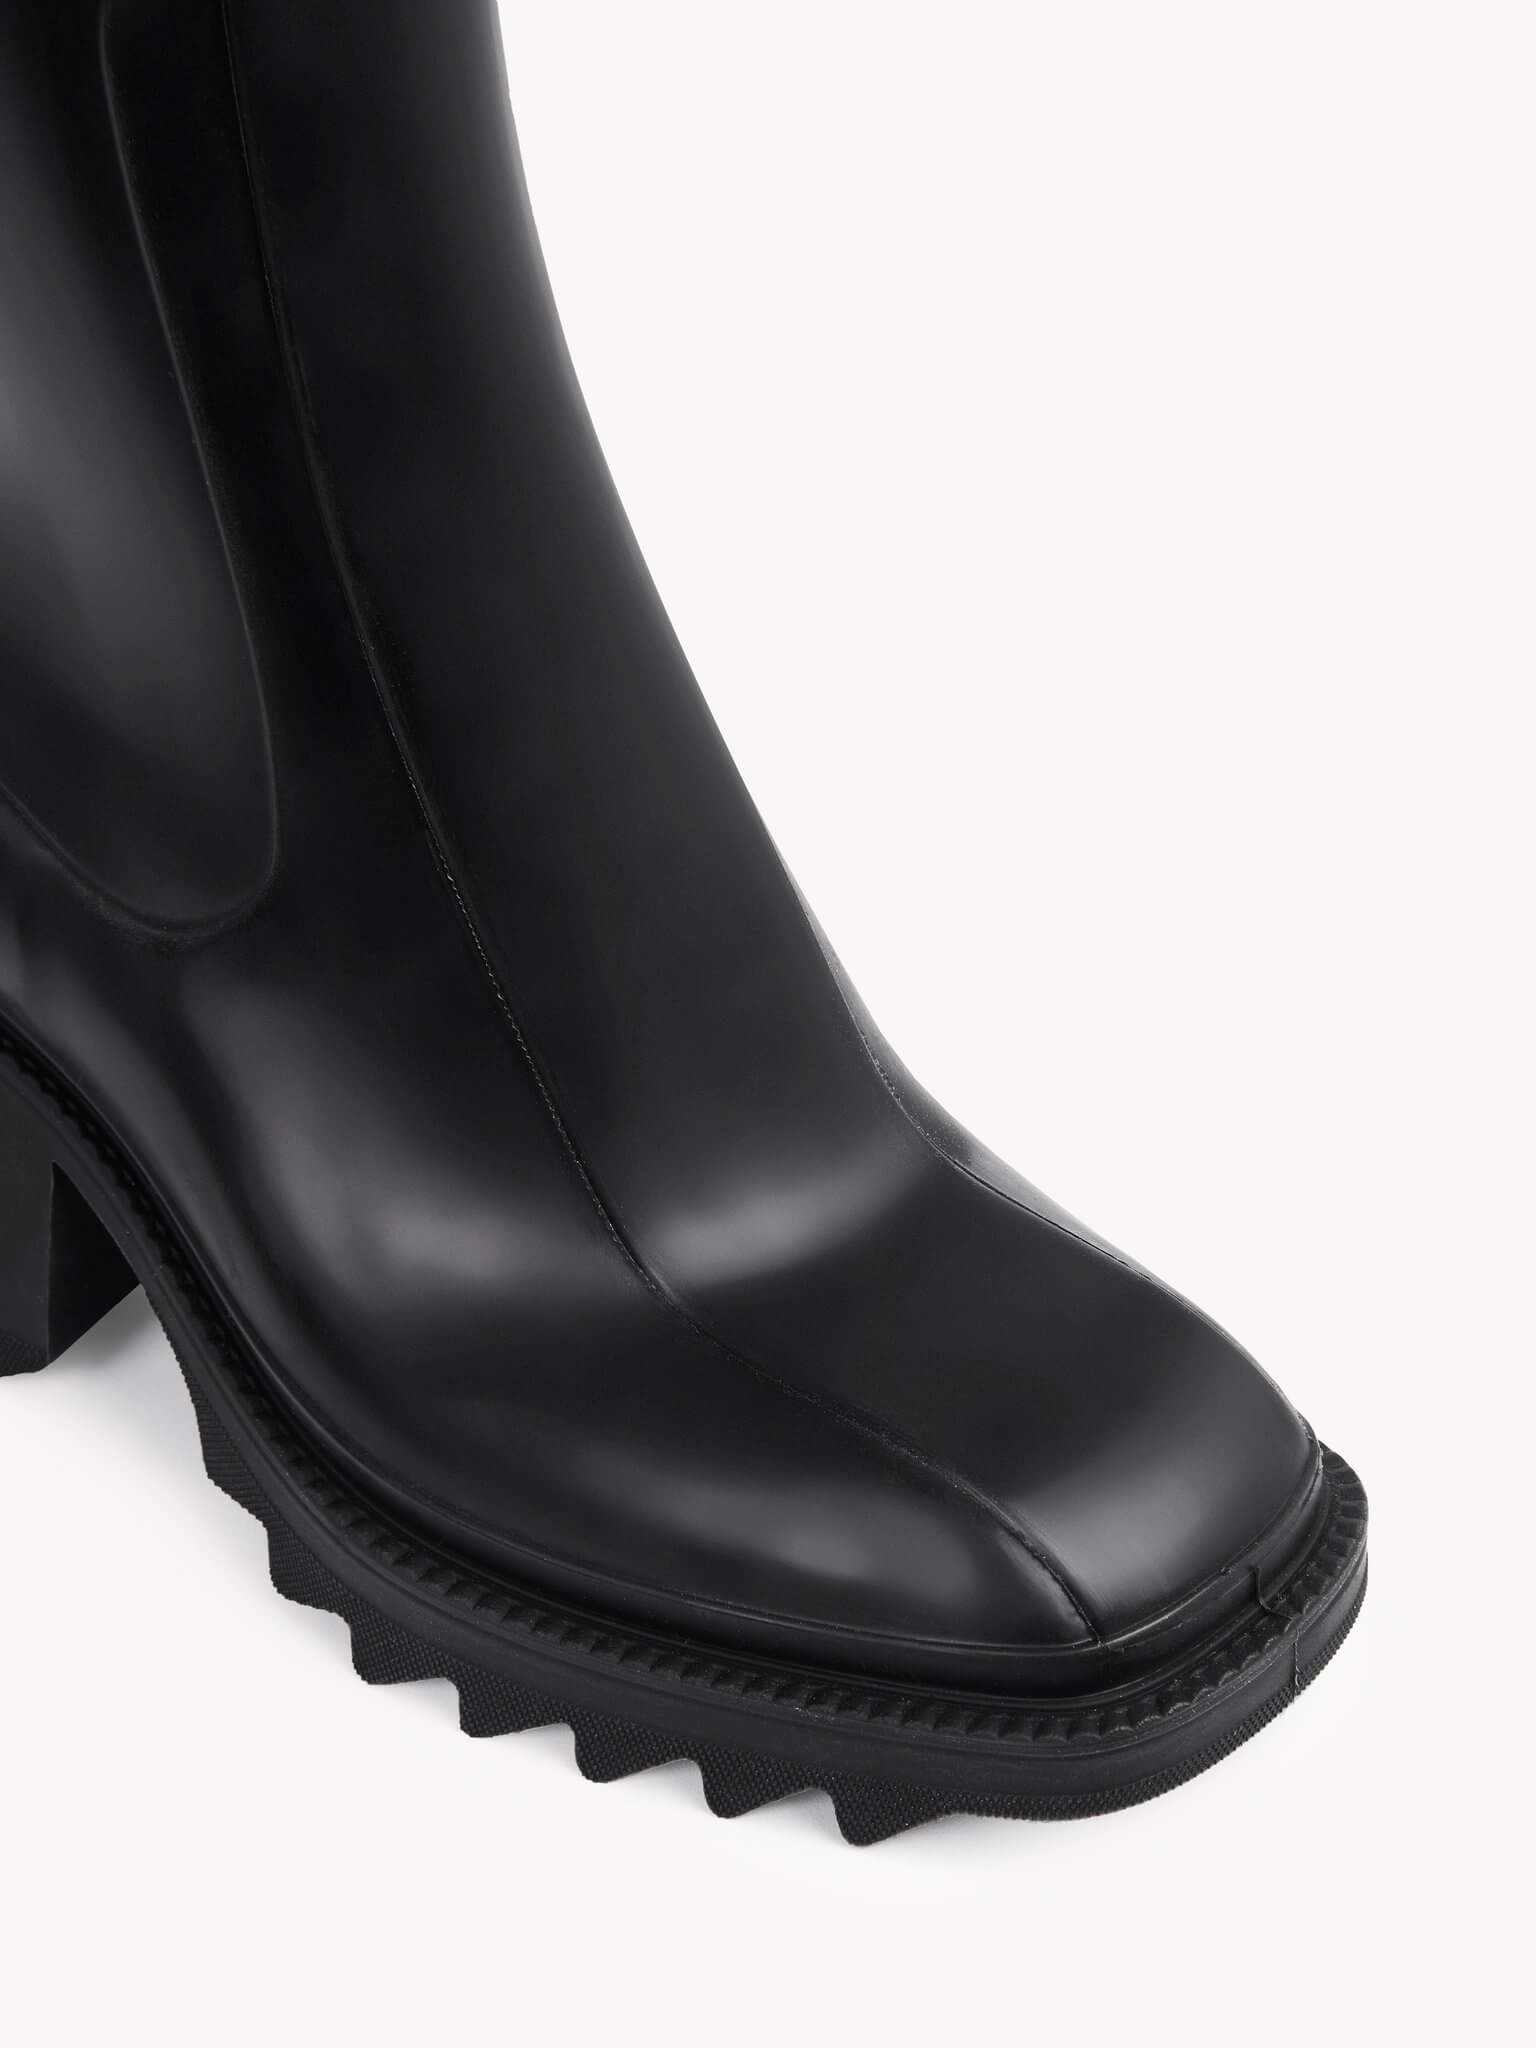 Chloe Betty Boot in Black available at TNT The New Trend Australia.